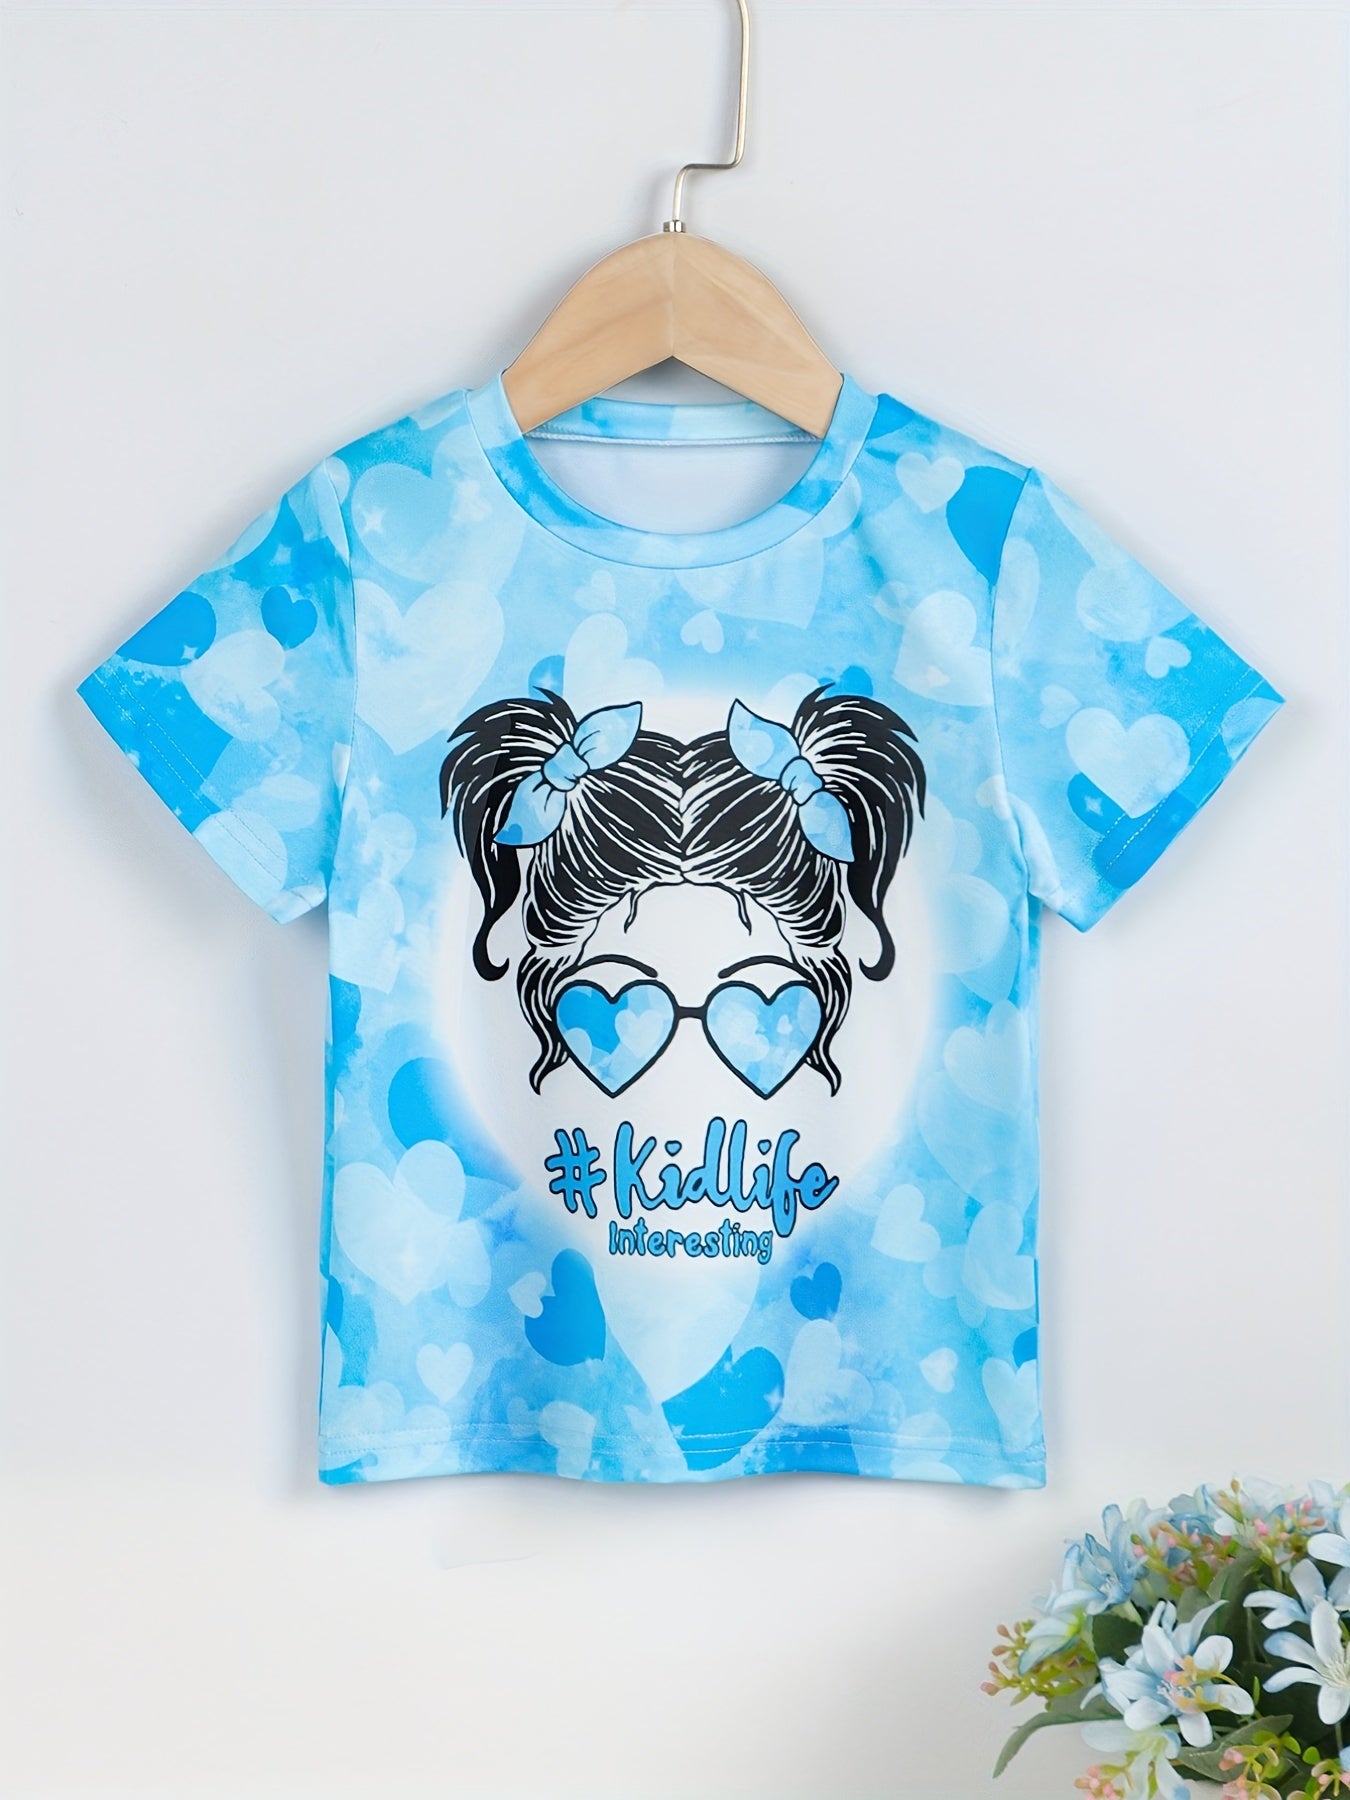 Girls Casual Trendy Cute Cartoon Girl Graphic T-shirt For Summer Holiday Party Kids Clothes